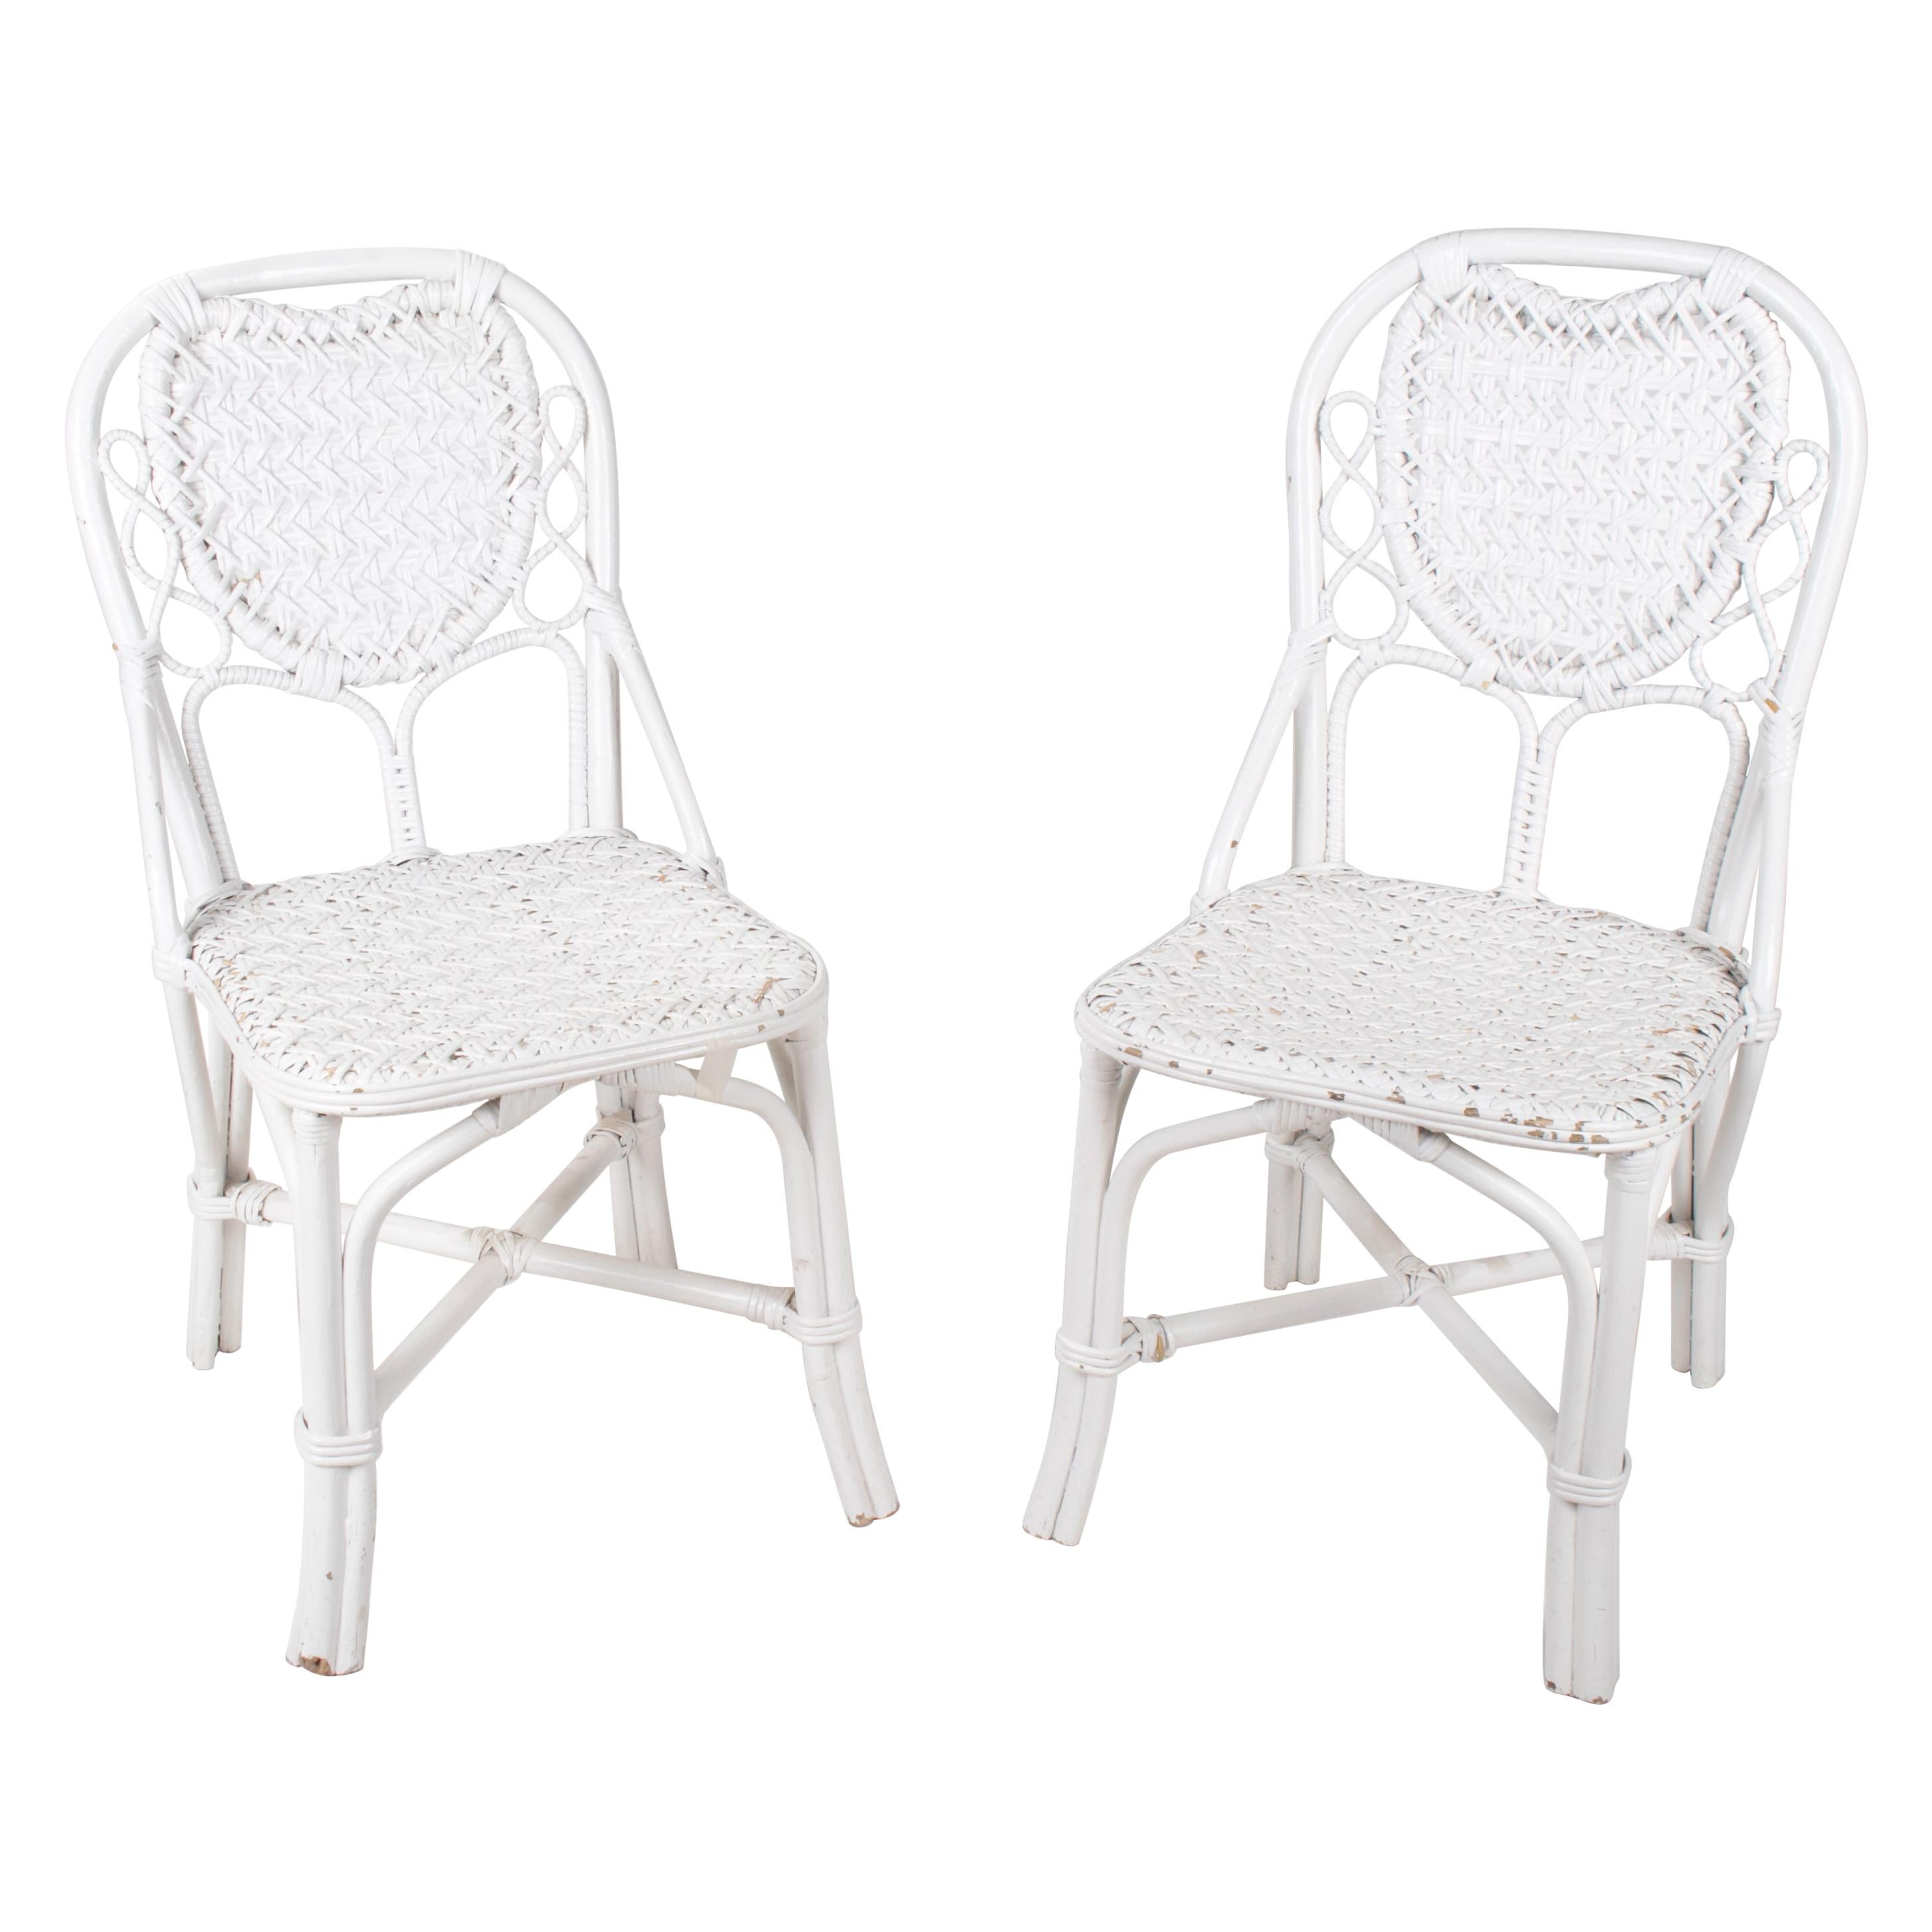 1970s Pair of Spanish Handmade White Wicker Wooden Chairs For Sale